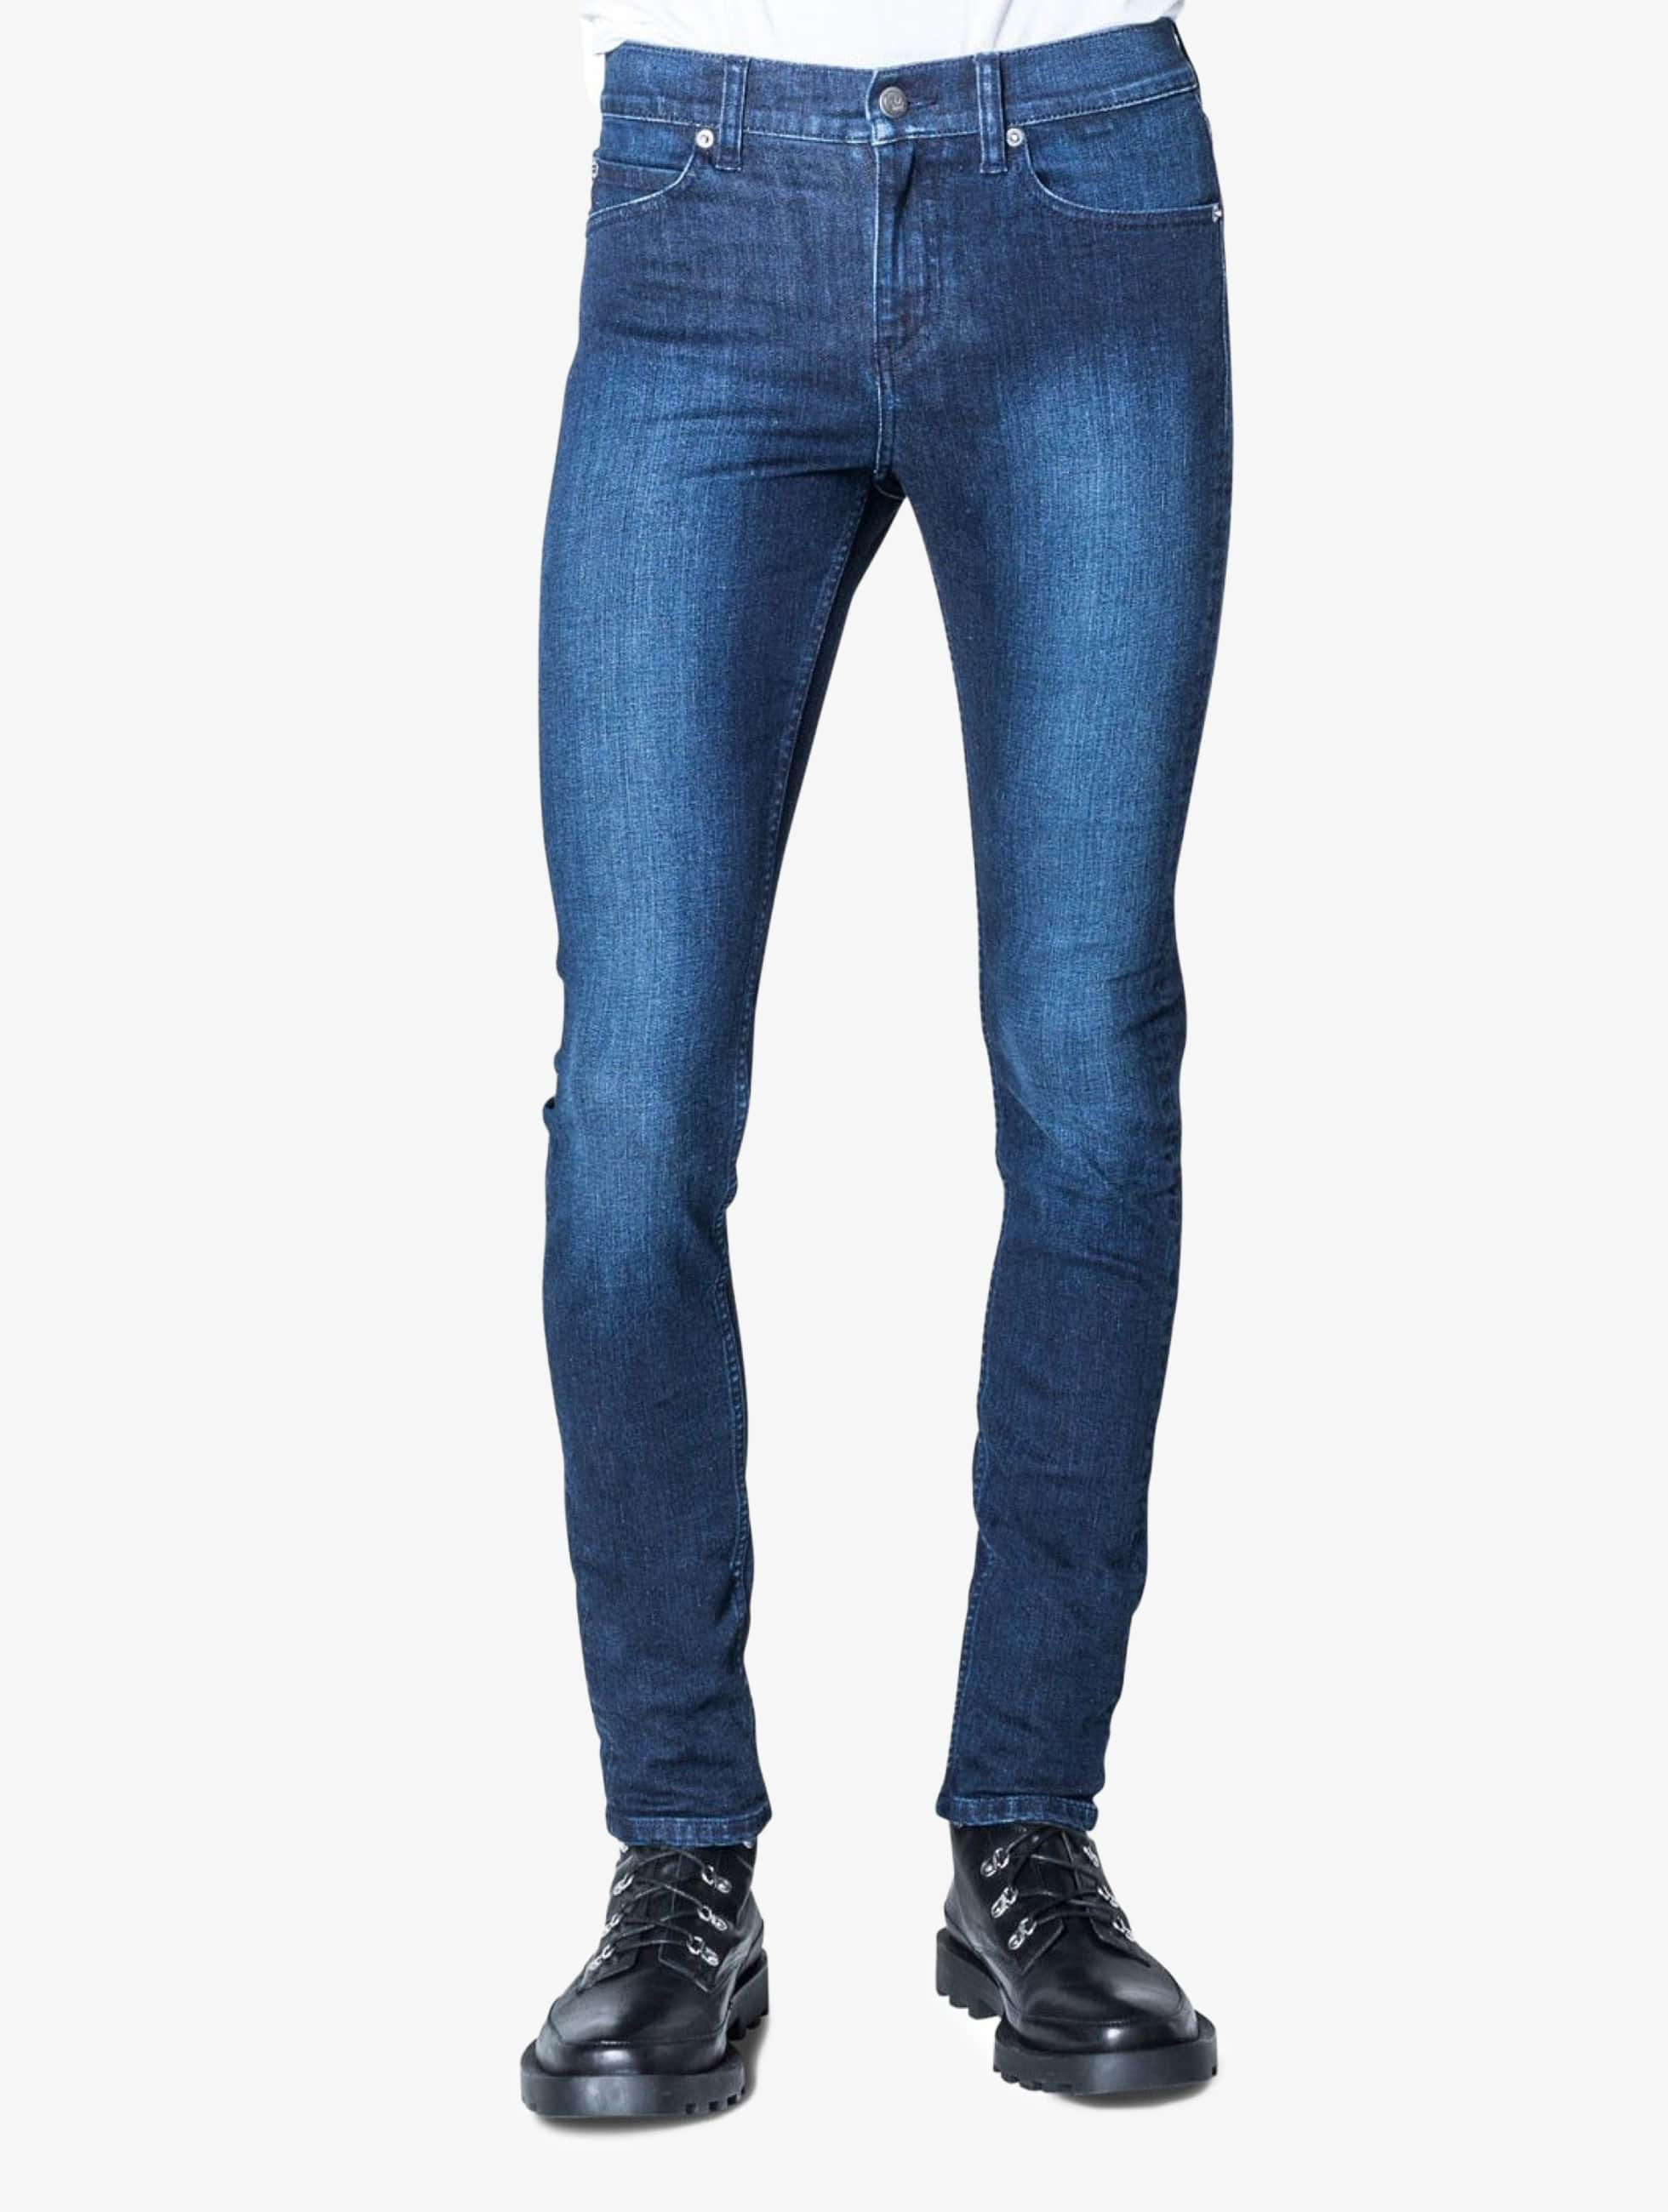 Cheap Jeans / in blue 551415